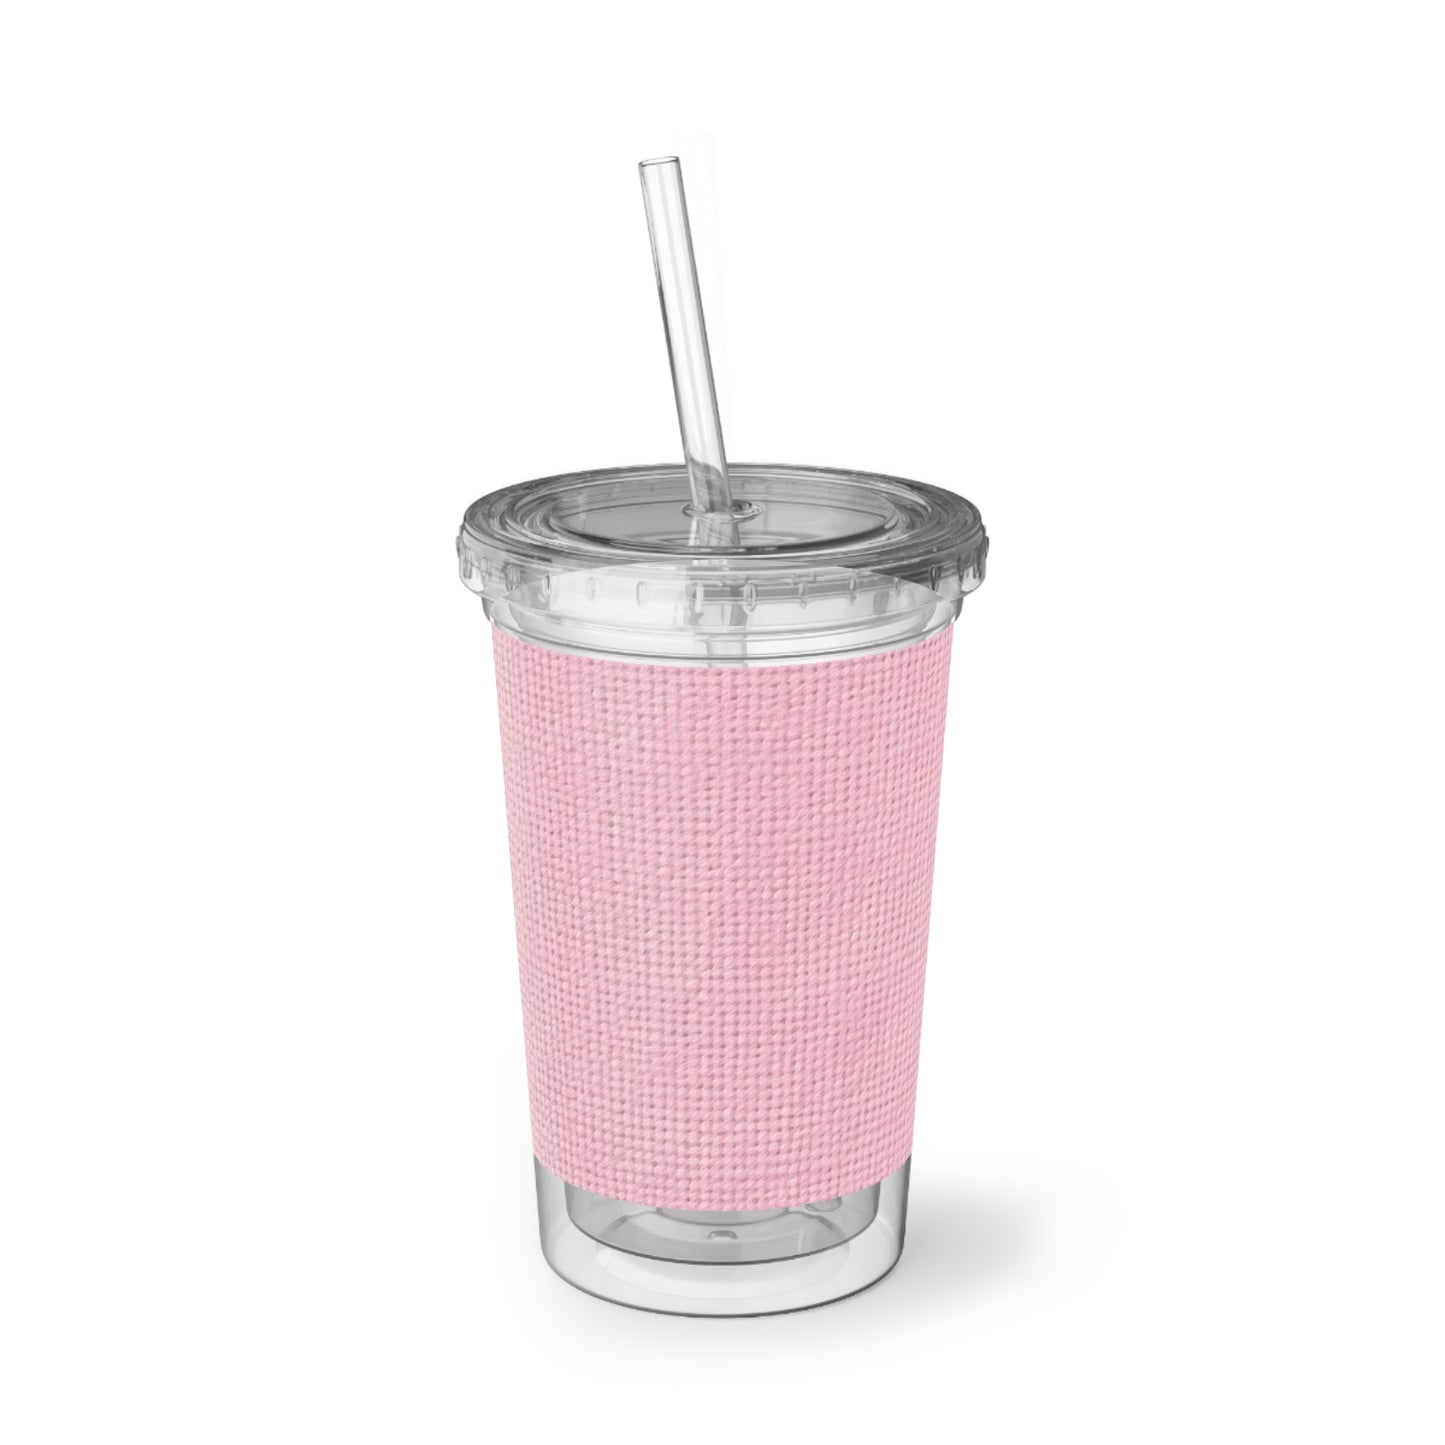 Blushing Garment Dye Pink: Denim-Inspired, Soft-Toned Fabric - Suave Acrylic Cup